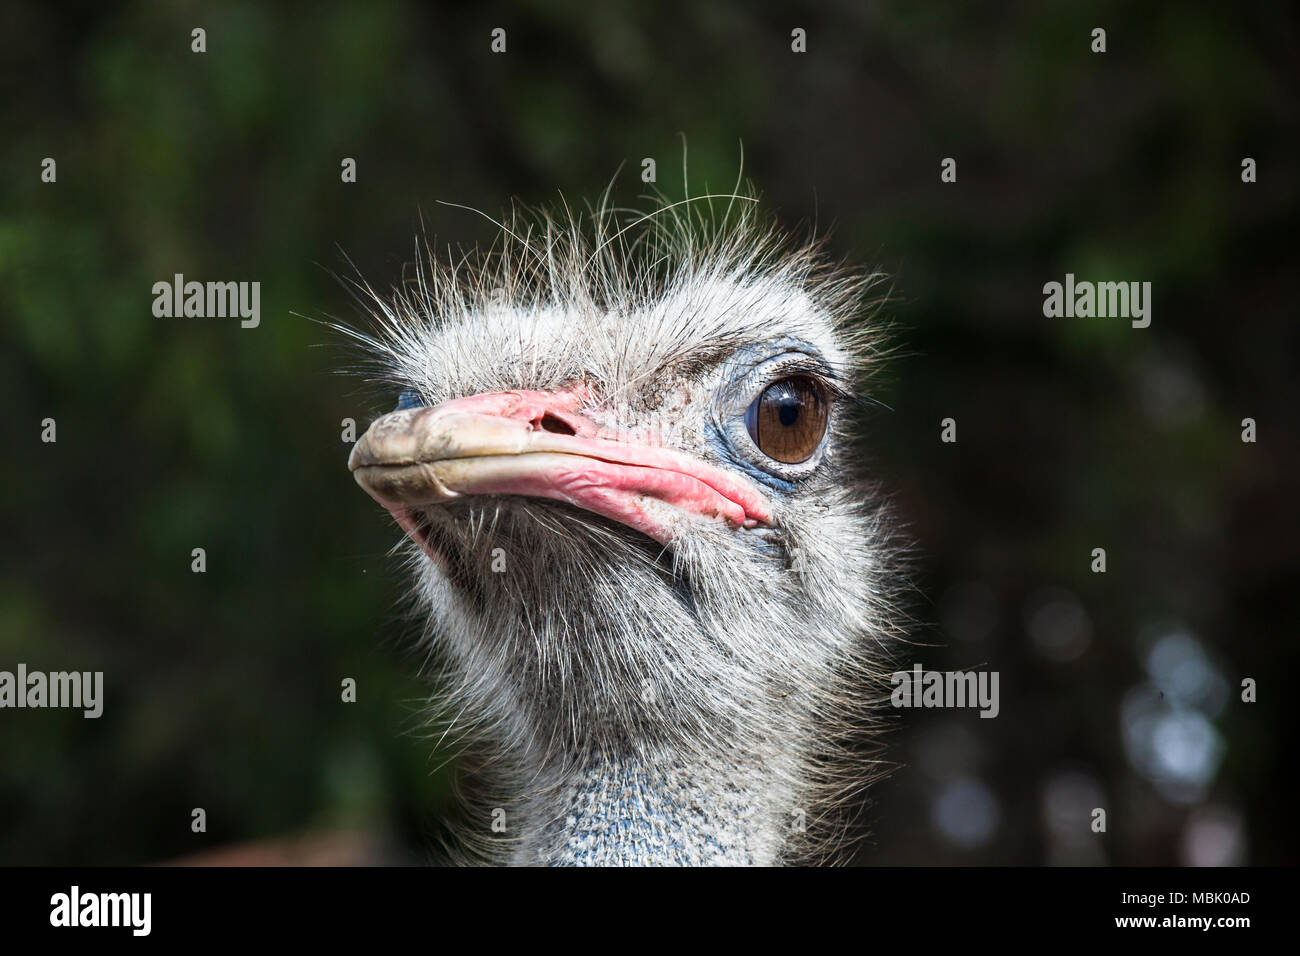 Ostrich head front view Stock Photo